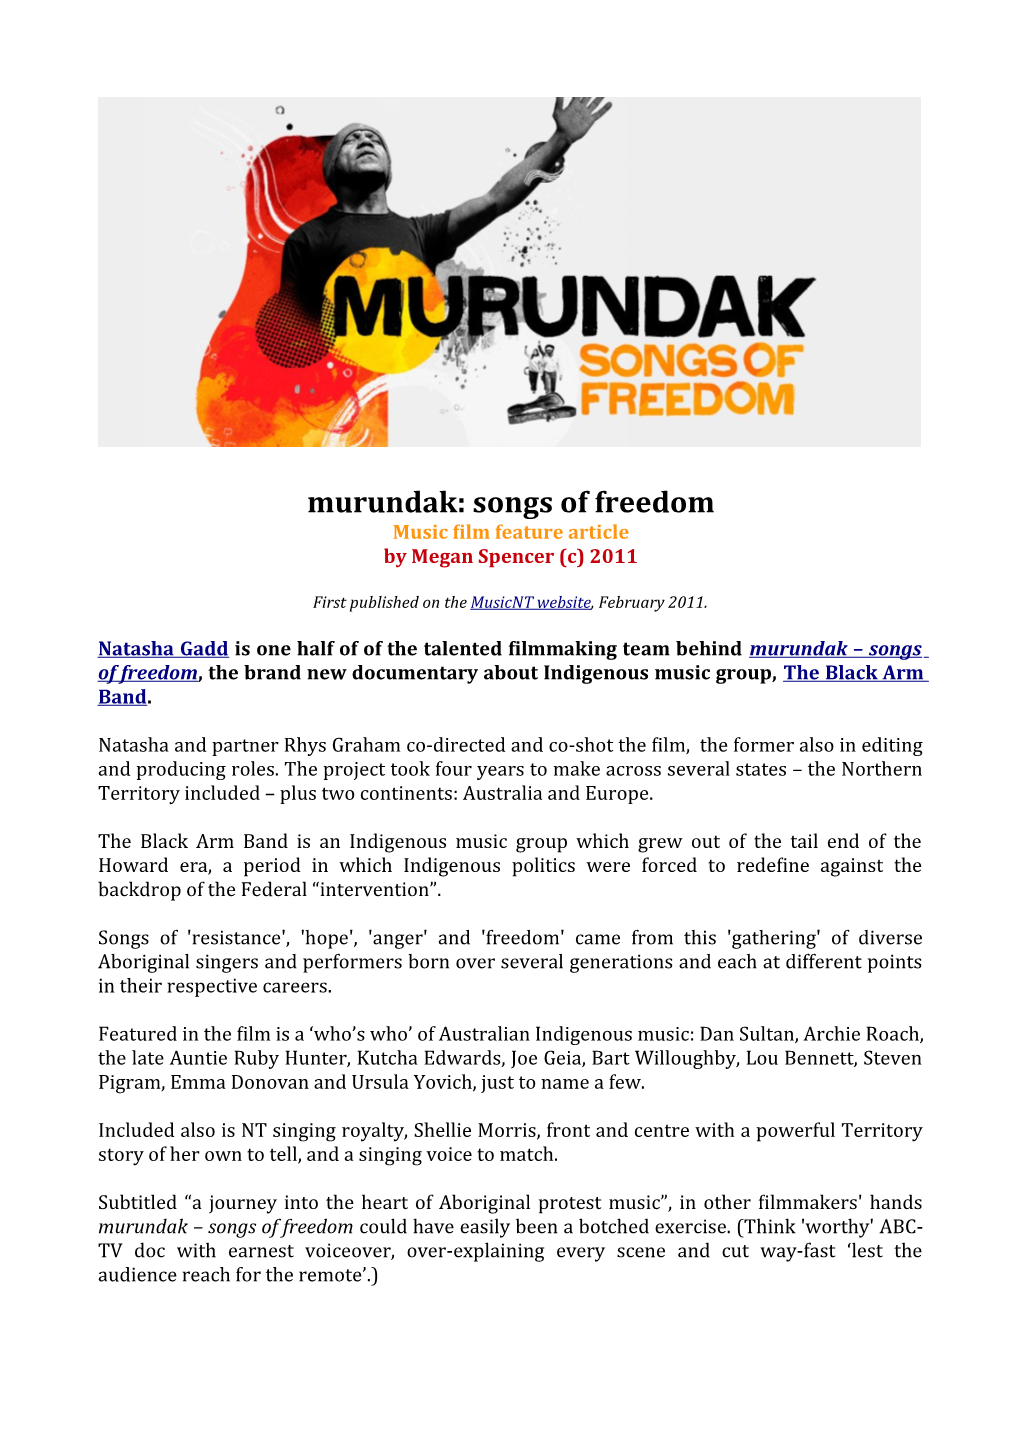 Murundak: Songs of Freedom Music Film Feature Article by Megan Spencer (C) 2011